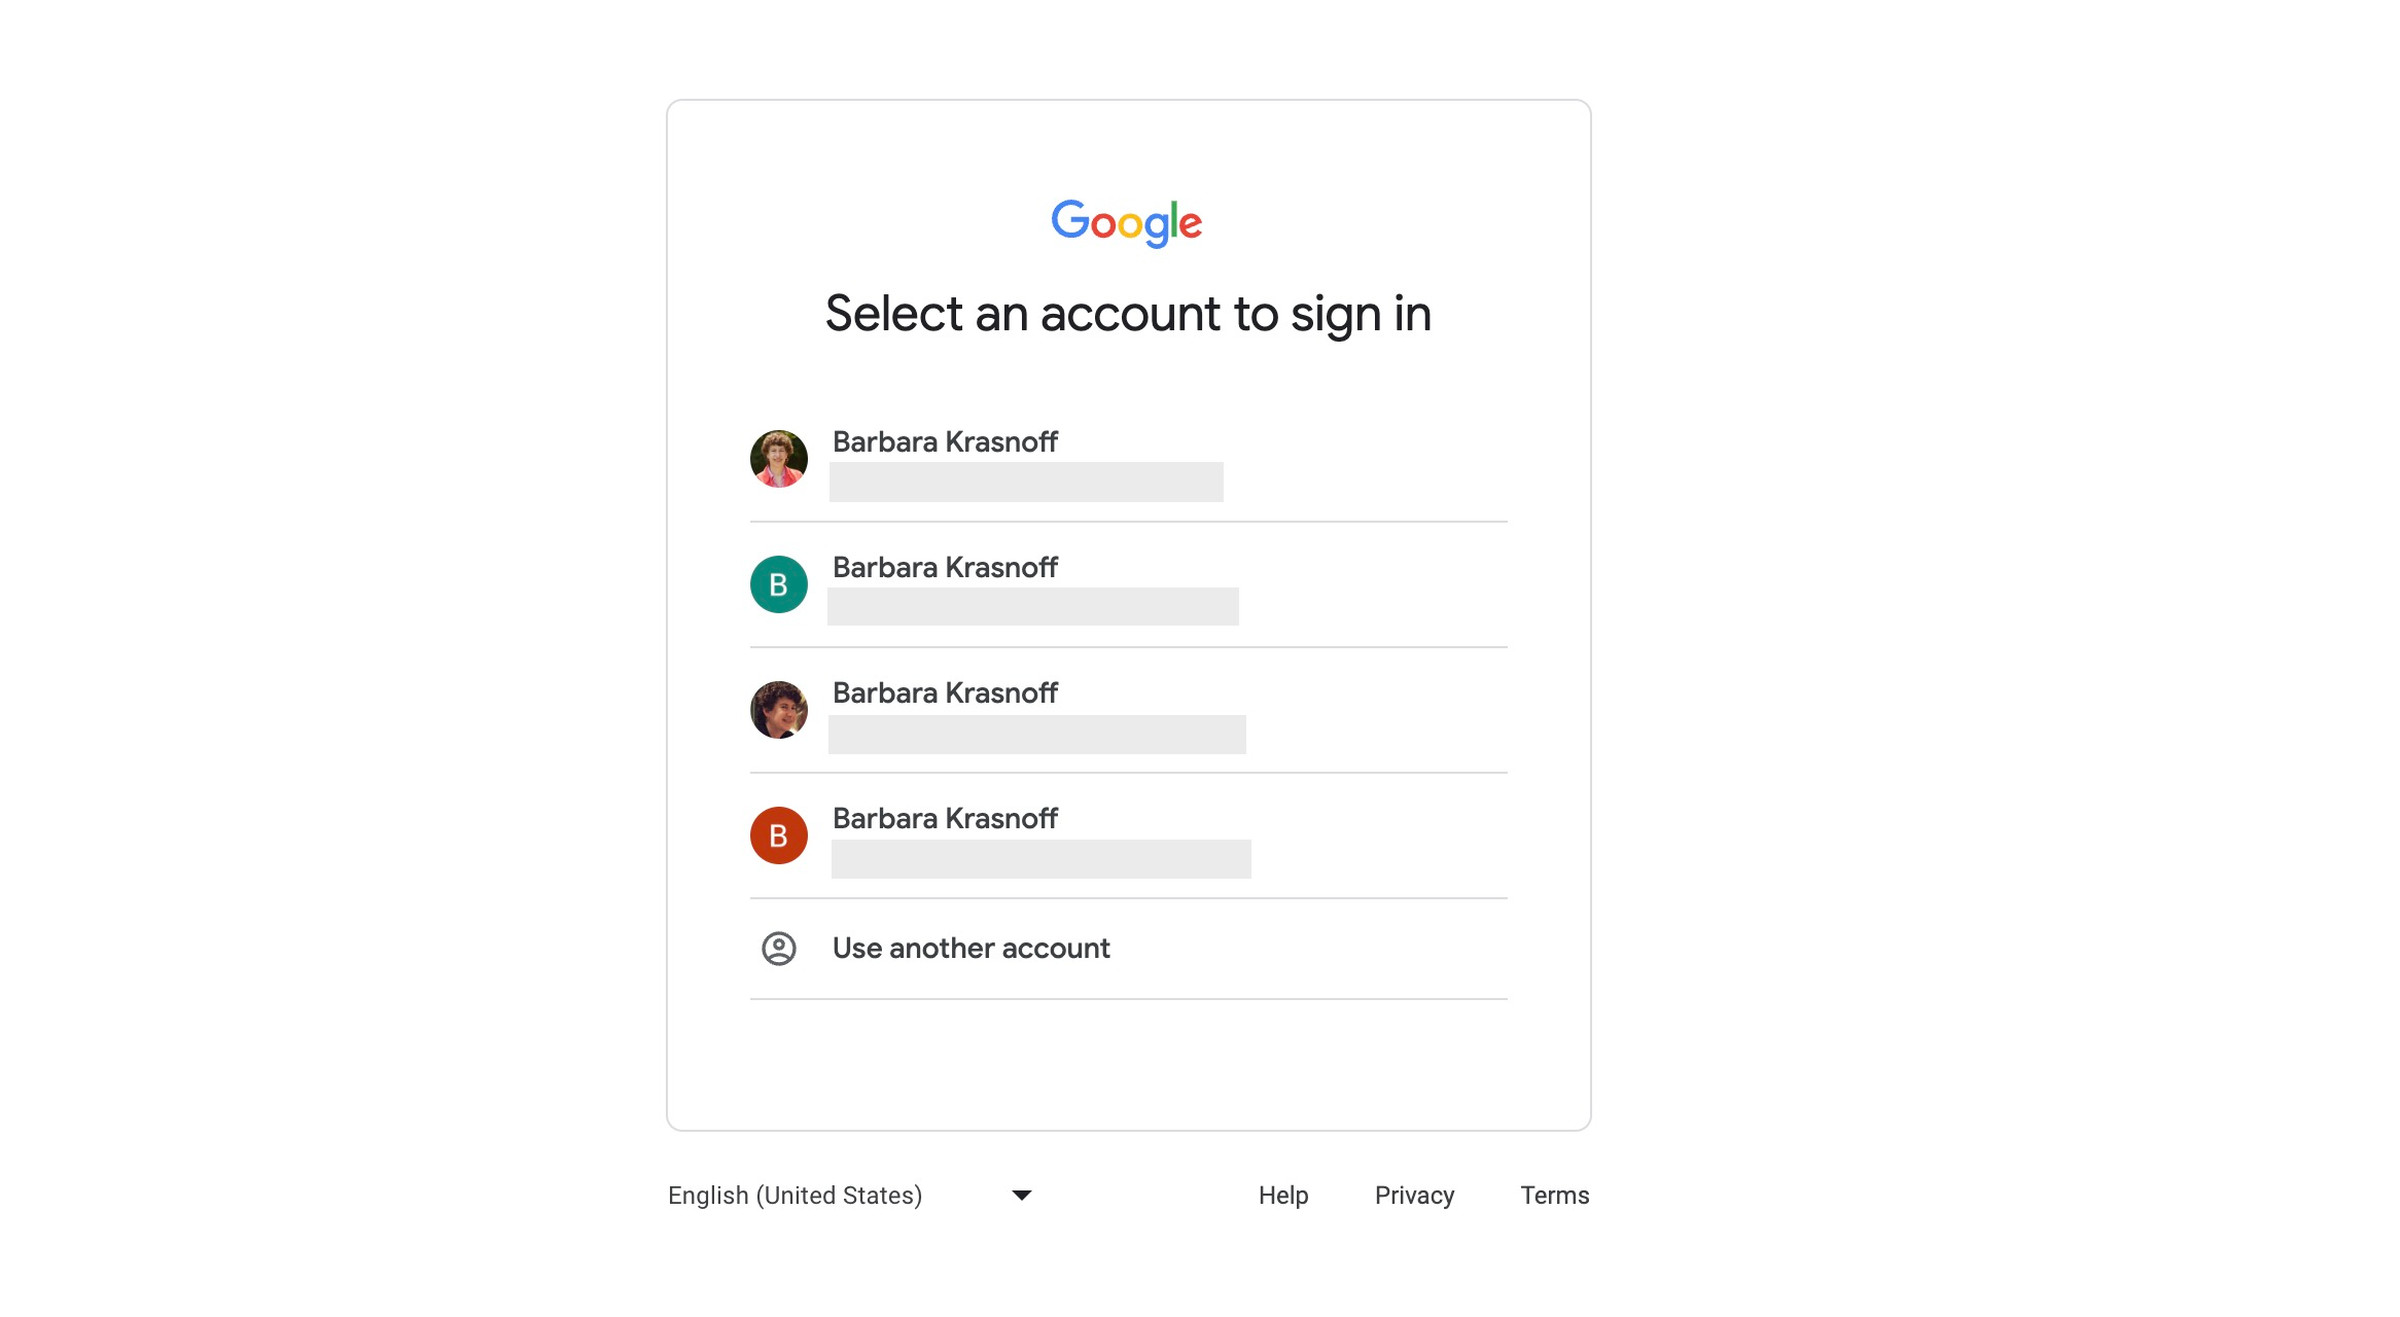 Google page headed “Select an account to sign in” with a list of four accounts for Barbara Krasnoff, the email addressed grayed out.